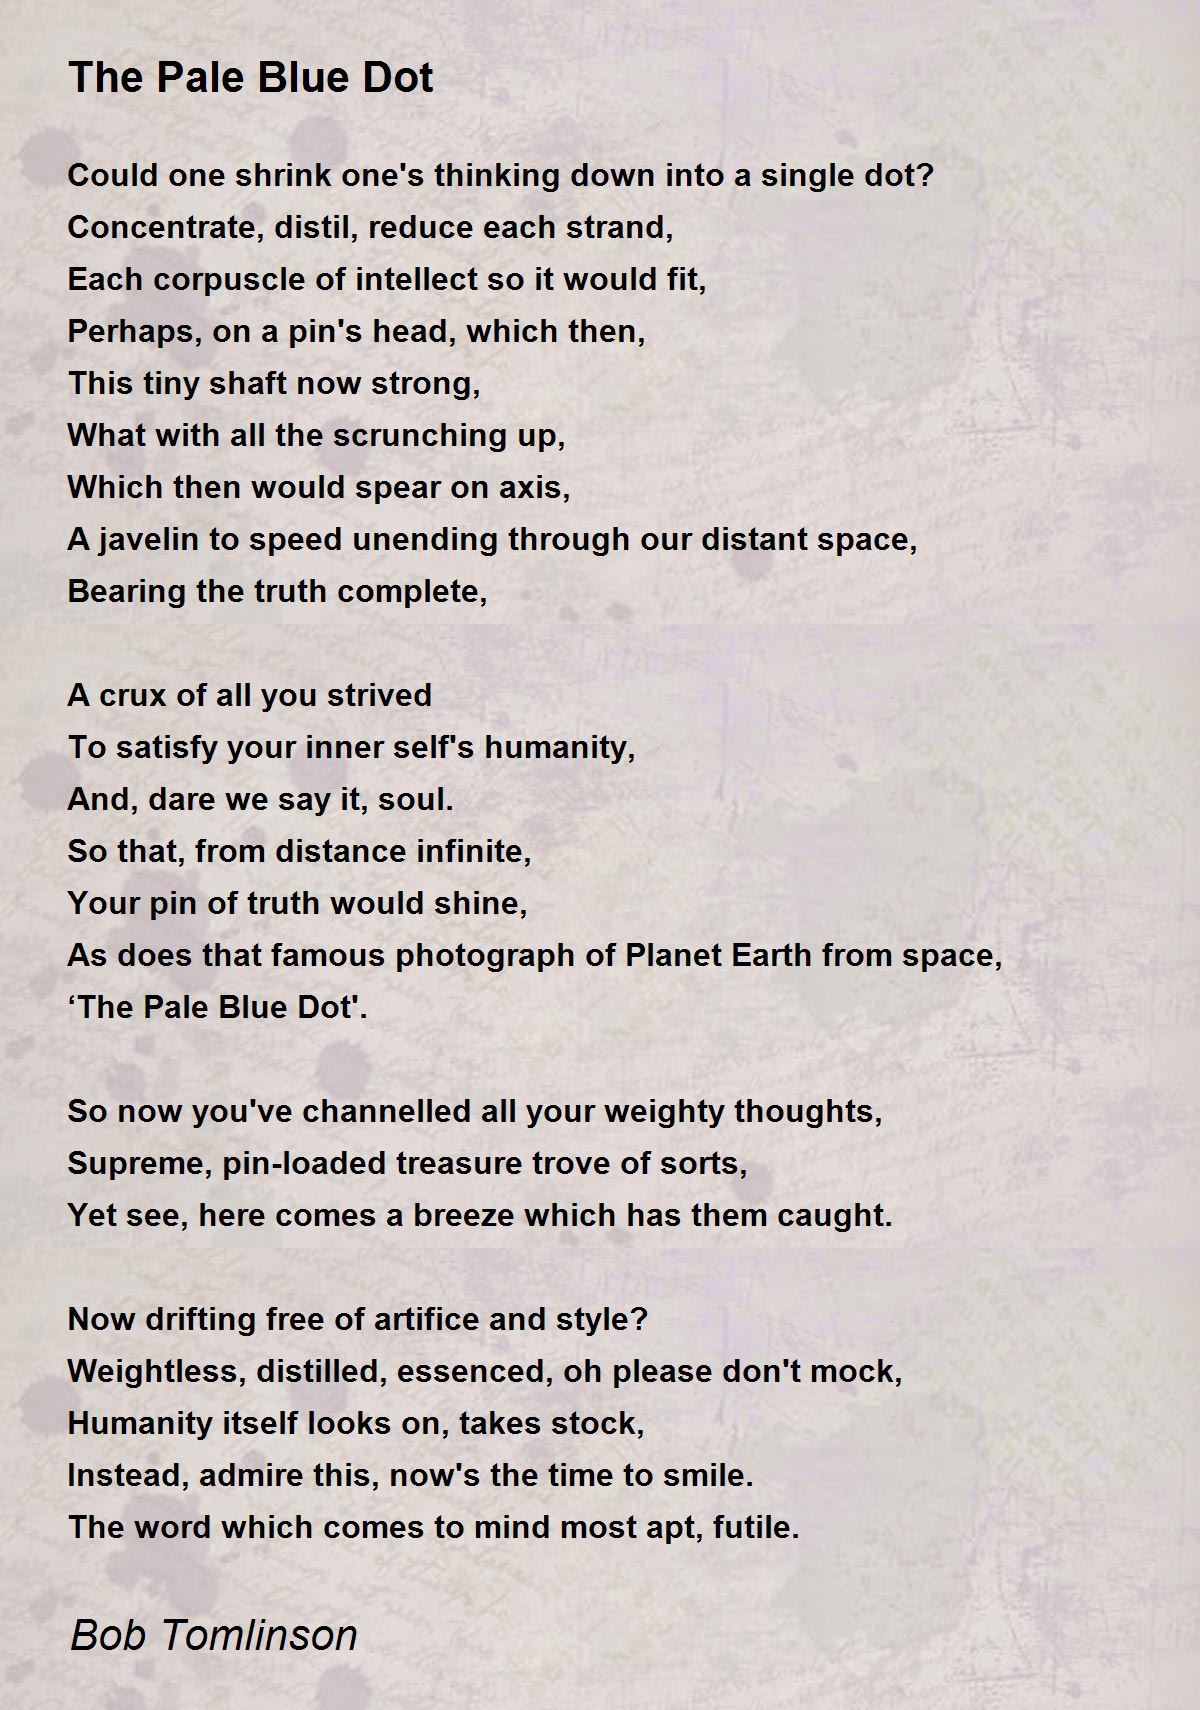 The Poetic Clarity of That 'Pale Blue Dot